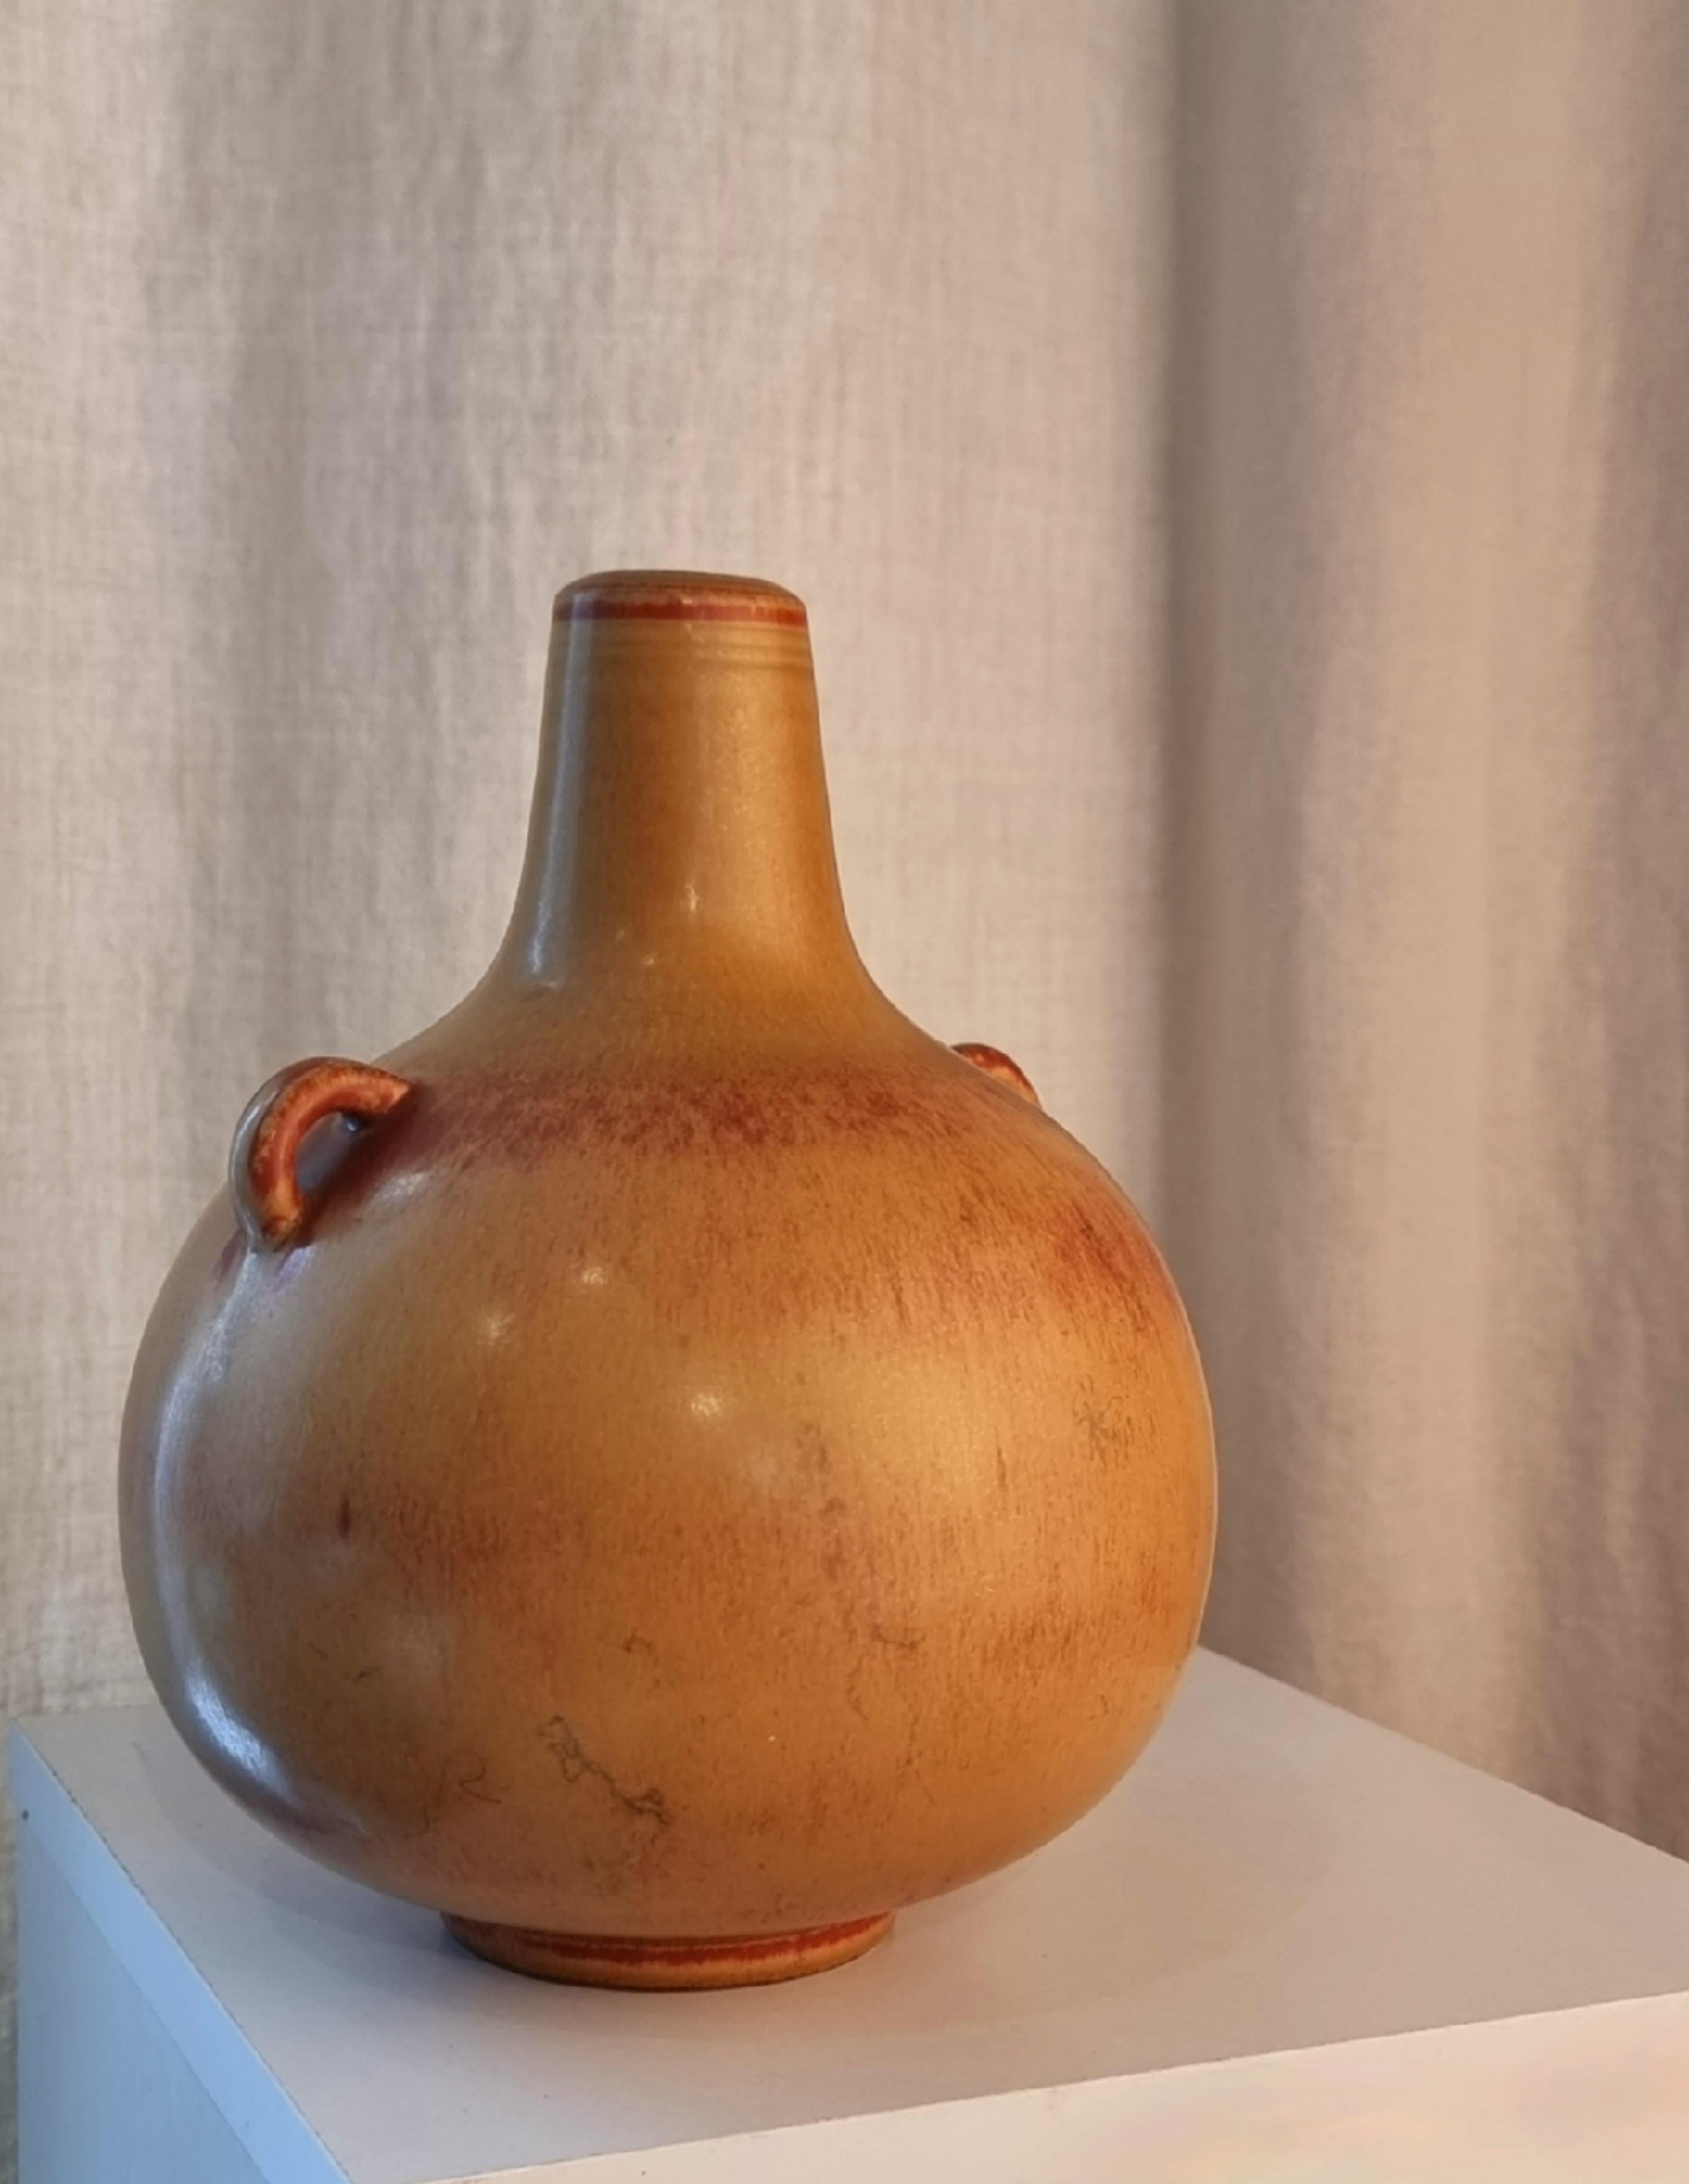 Stoneware vase with brown hare fur glaze and two small handles, by Gunnar Nylund for Rörstrand, Sweden mid-1900s.

In beautiful condition, smaller signs of use and wear. 

